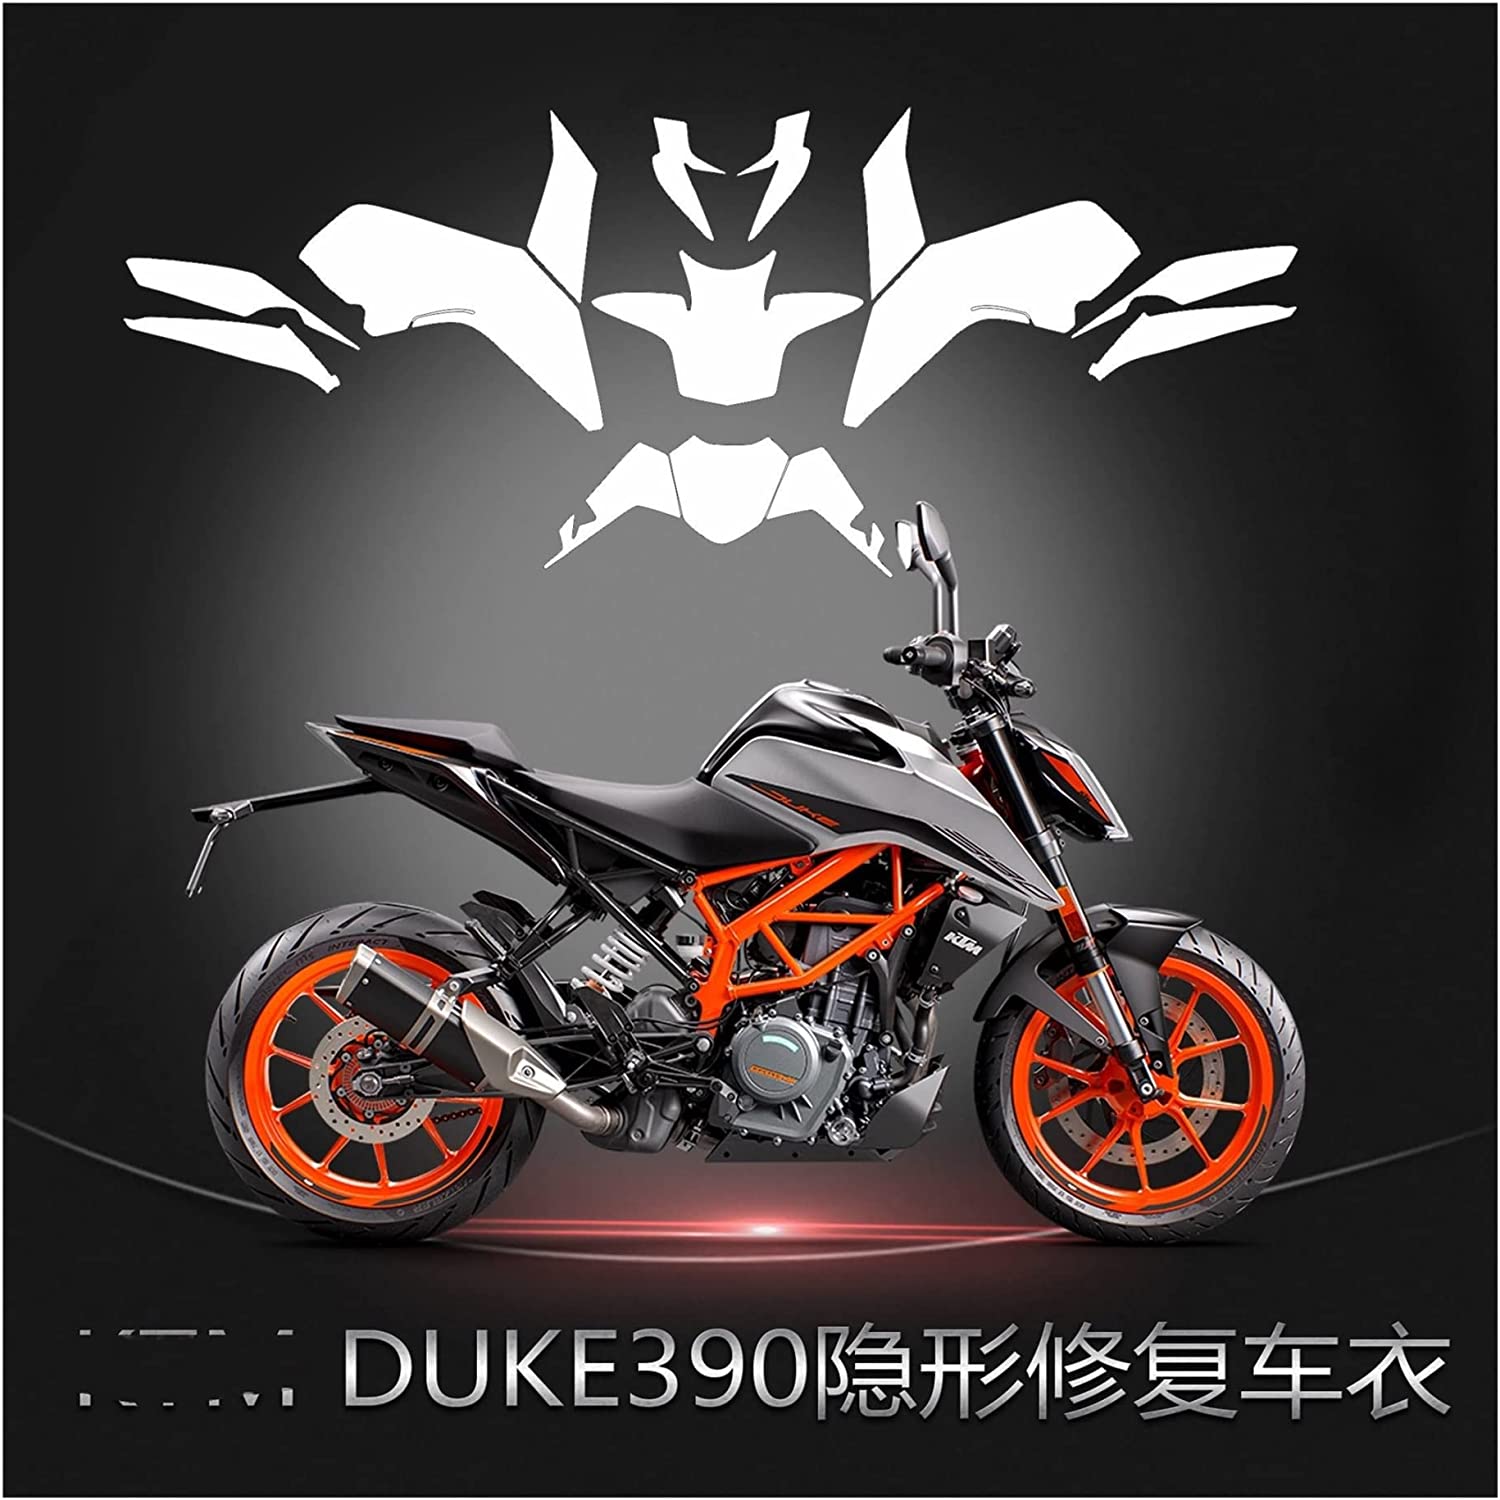 HIRSHA Motorcycle Fuel Tank Sticker for 390 Duke DUKE250 Motorcycle Fuel Tank Stickers Waterproof Personalized Fishbone Stickers (Color : 5)